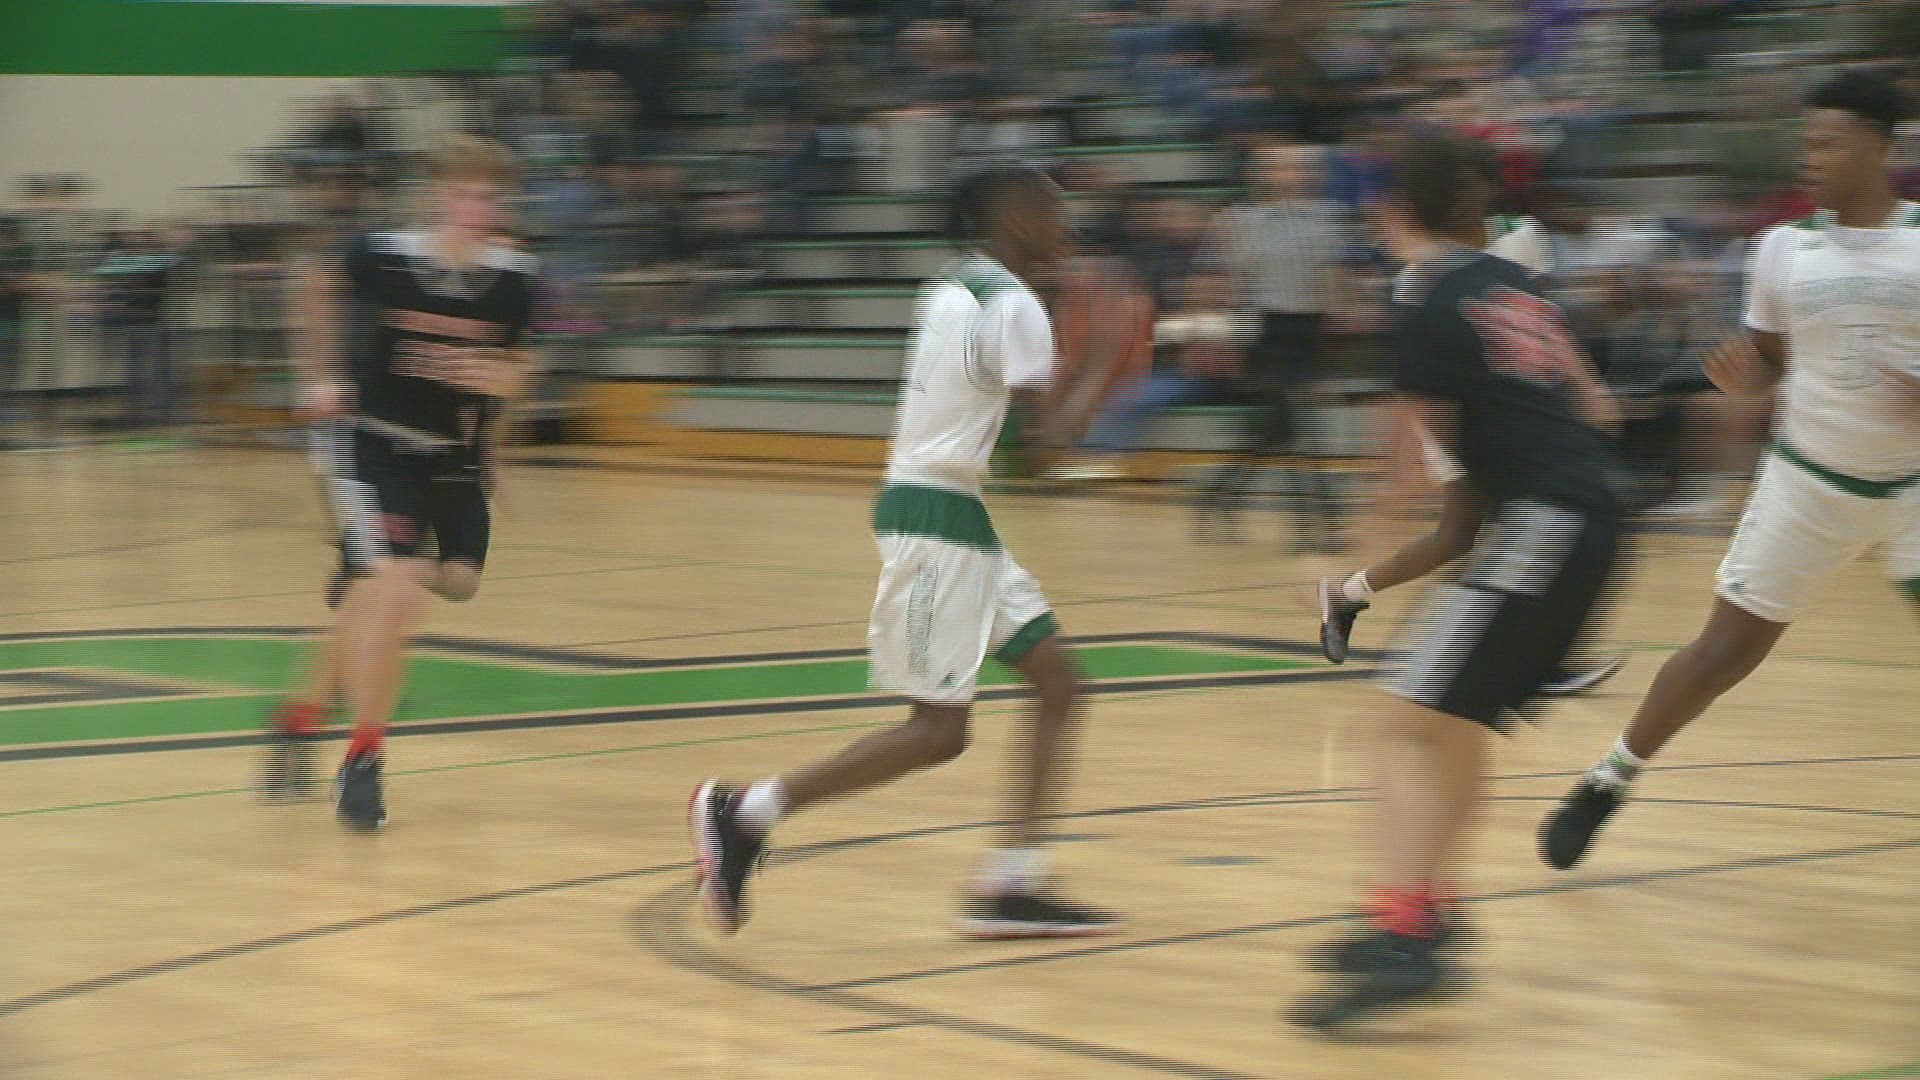 Highlights of No. 10 Parkrose's 60-48 win over Scappoose on Feb. 28, 2020. Highlights are part of KGW's Friday Night Hoops with Orlando Sanchez.